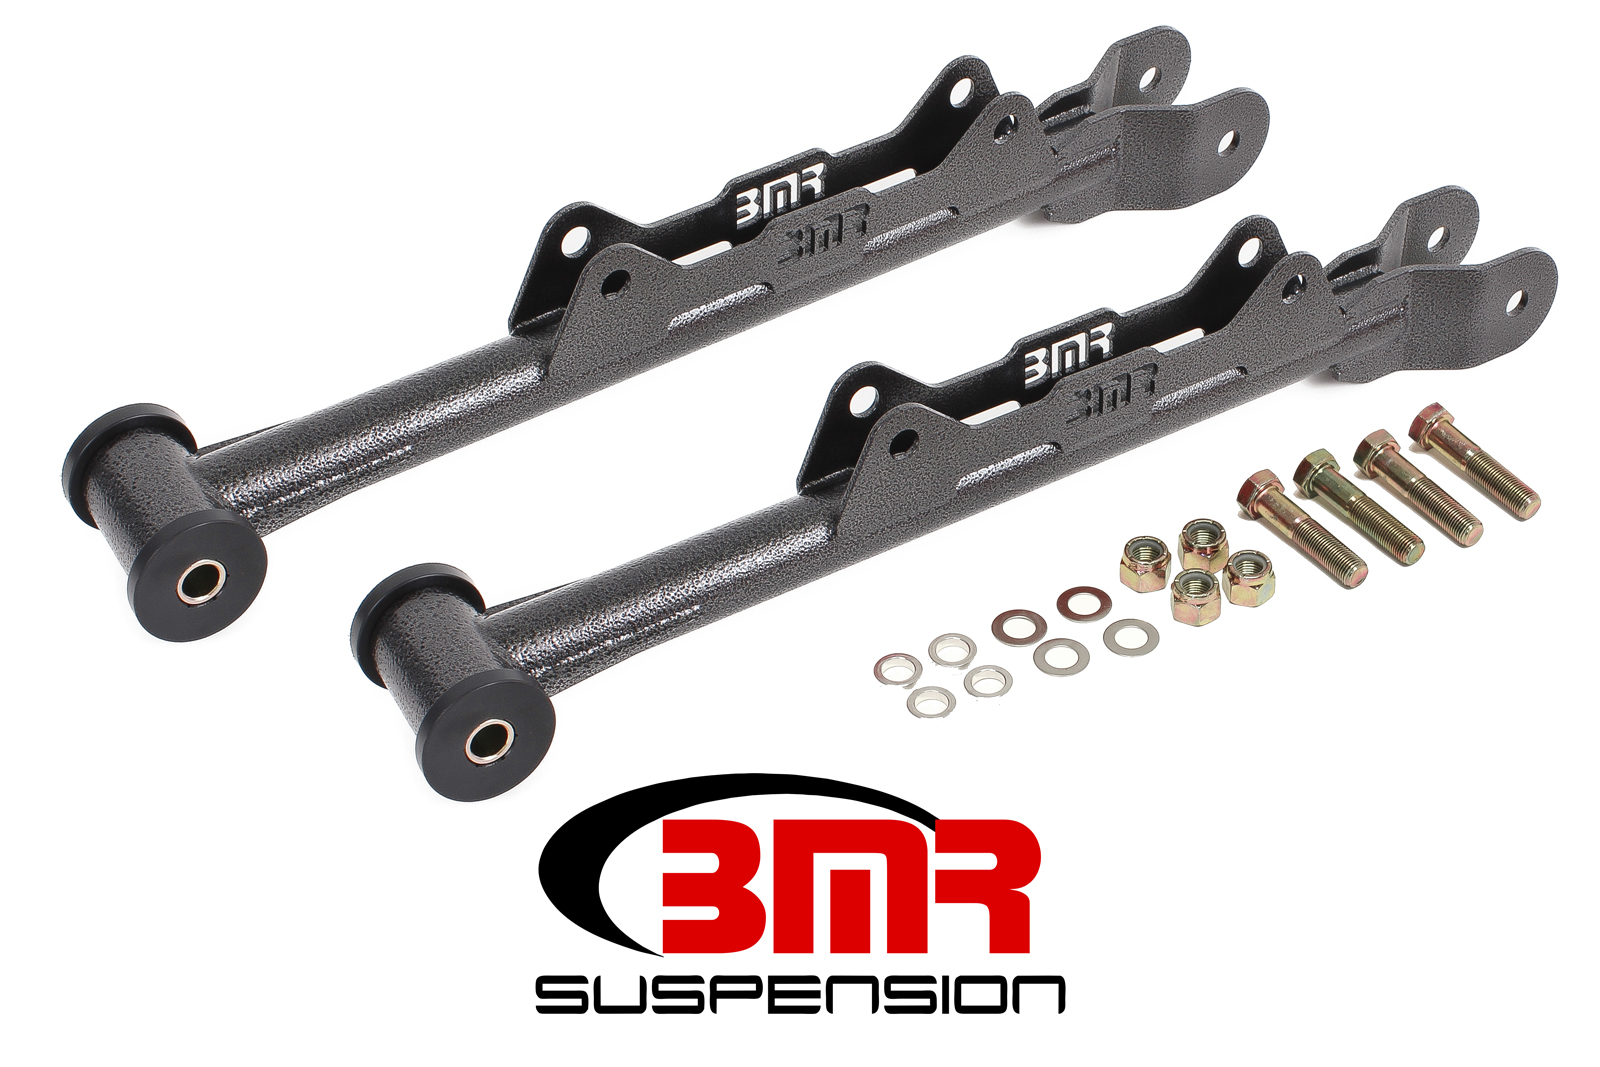 Lower Control Arms, Rear, Chrome-moly, Non-Adjustable, Delrin, Fits all 2010-2015 Chevrolet Camaros, BMR Suspension - MTCA030H